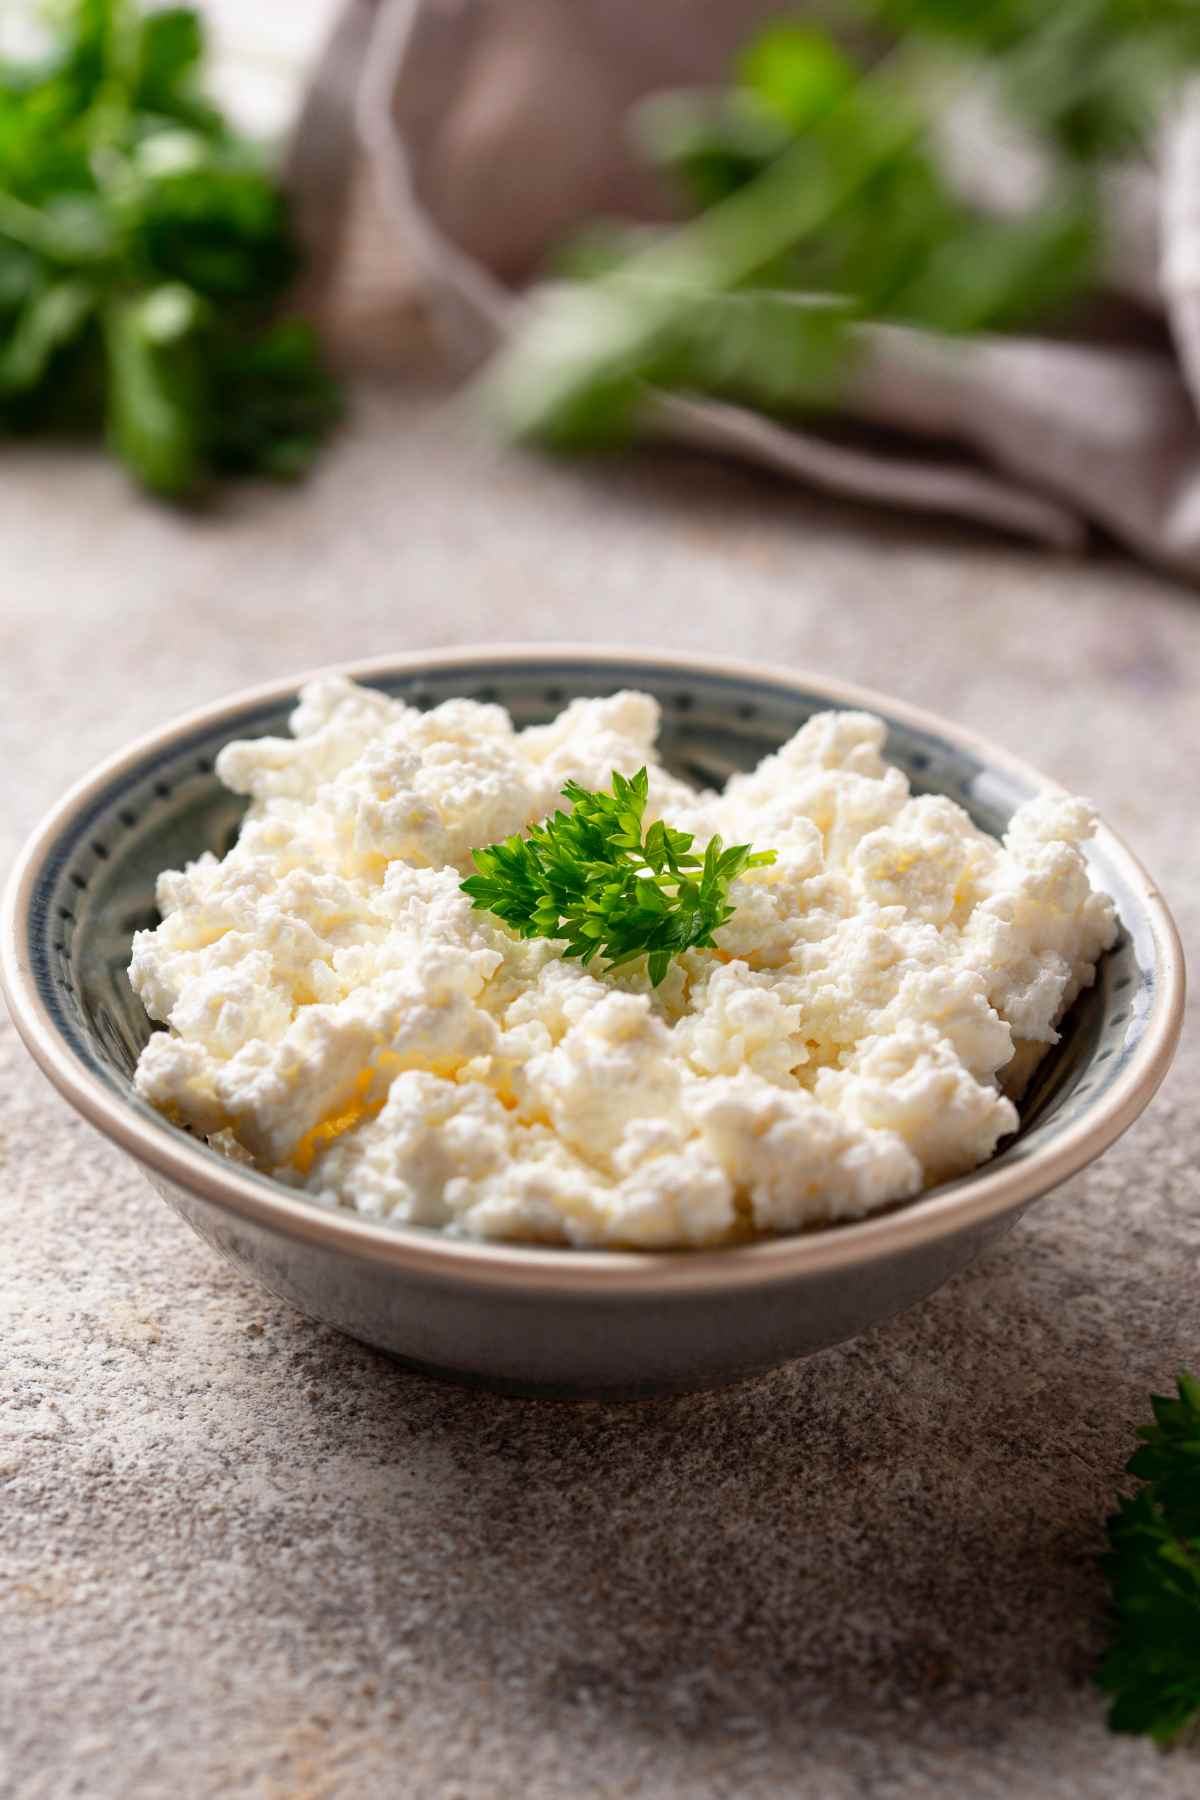 Is cottage cheese a suitable food to eat on keto? How many carbs are in cottage cheese? Read on to learn more about cottage cheese and how it fits into your new ketogenic lifestyle.